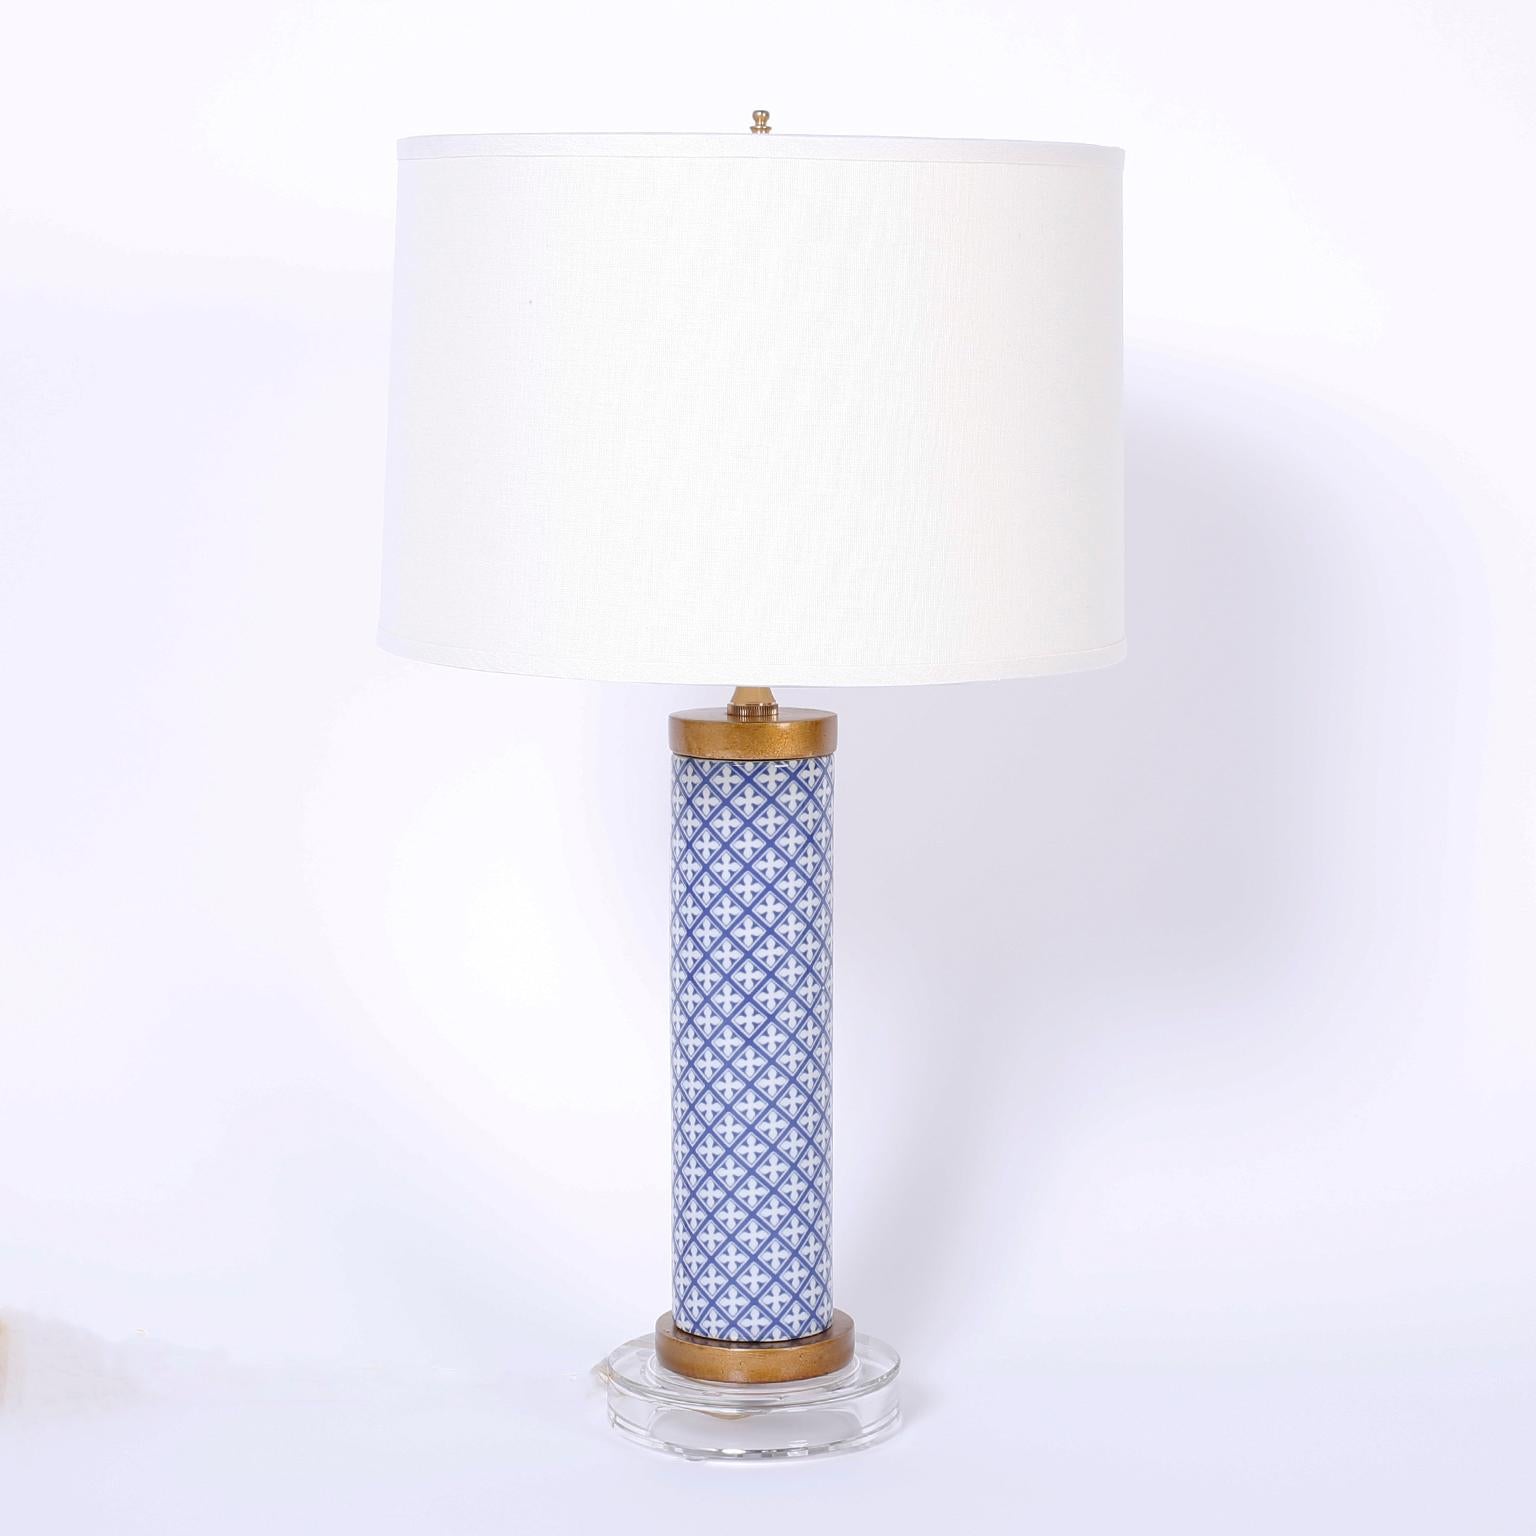 Chic pair of modern glass table lamps with reverse printed repeating blue and white floral emblems under a classic canister form while presented on Lucite bases.